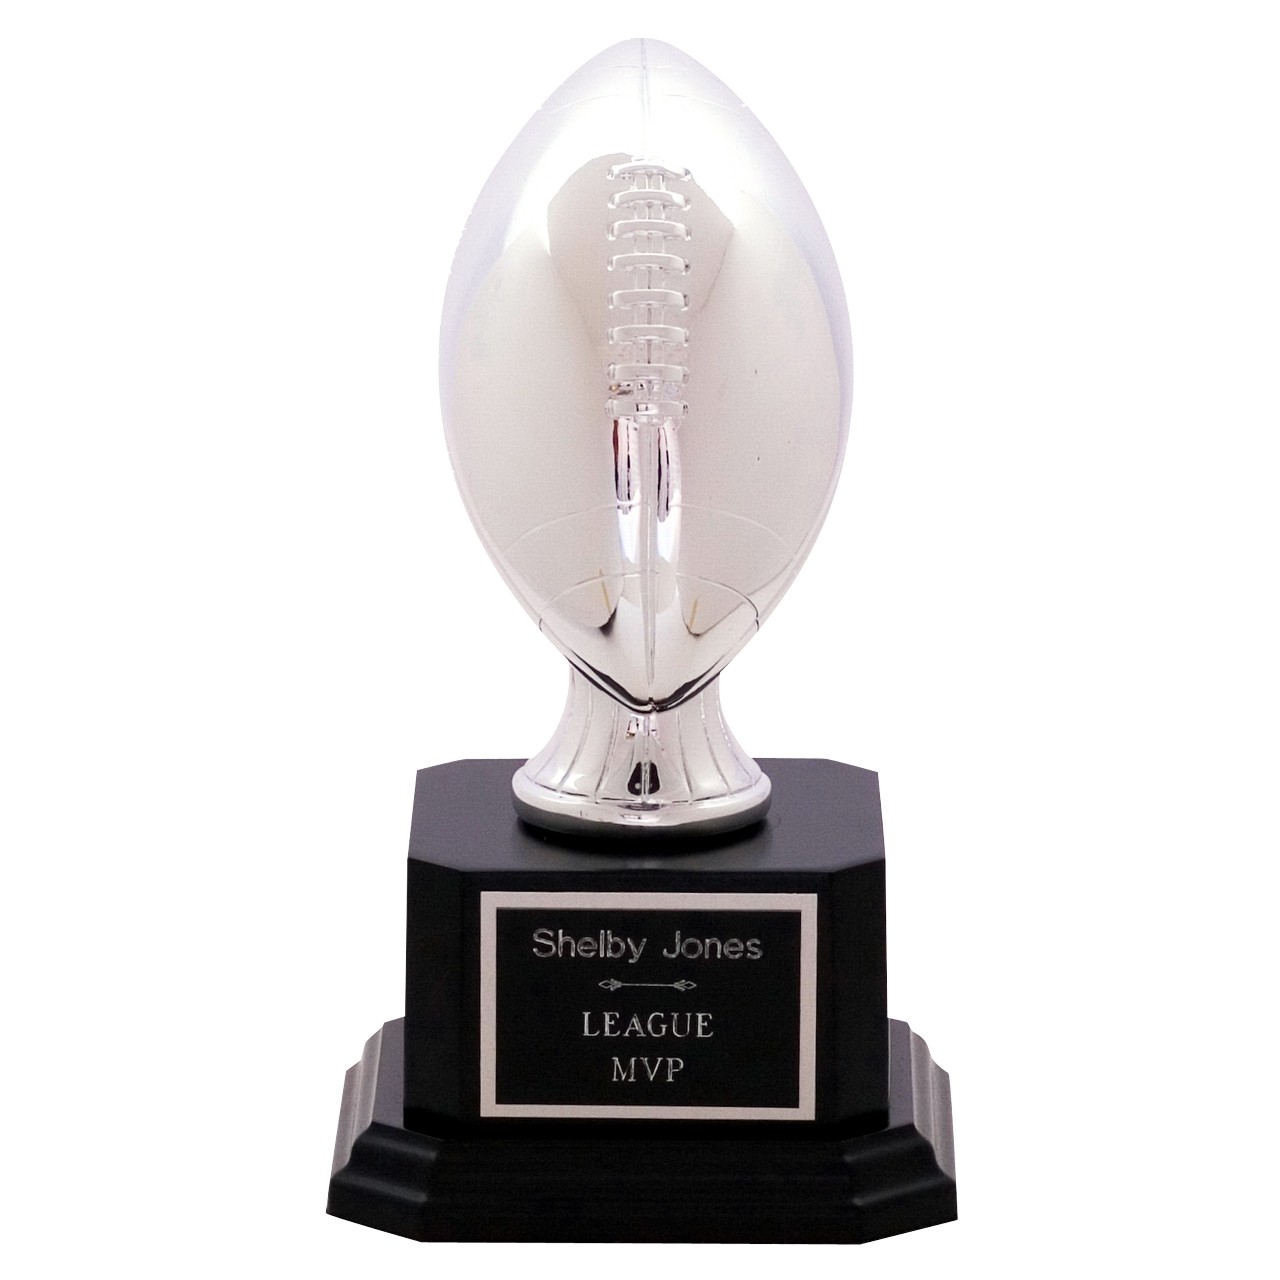 FOOTBALL RESIN TROPHY WHOLE TEAM FREE ENGRAVING!! 